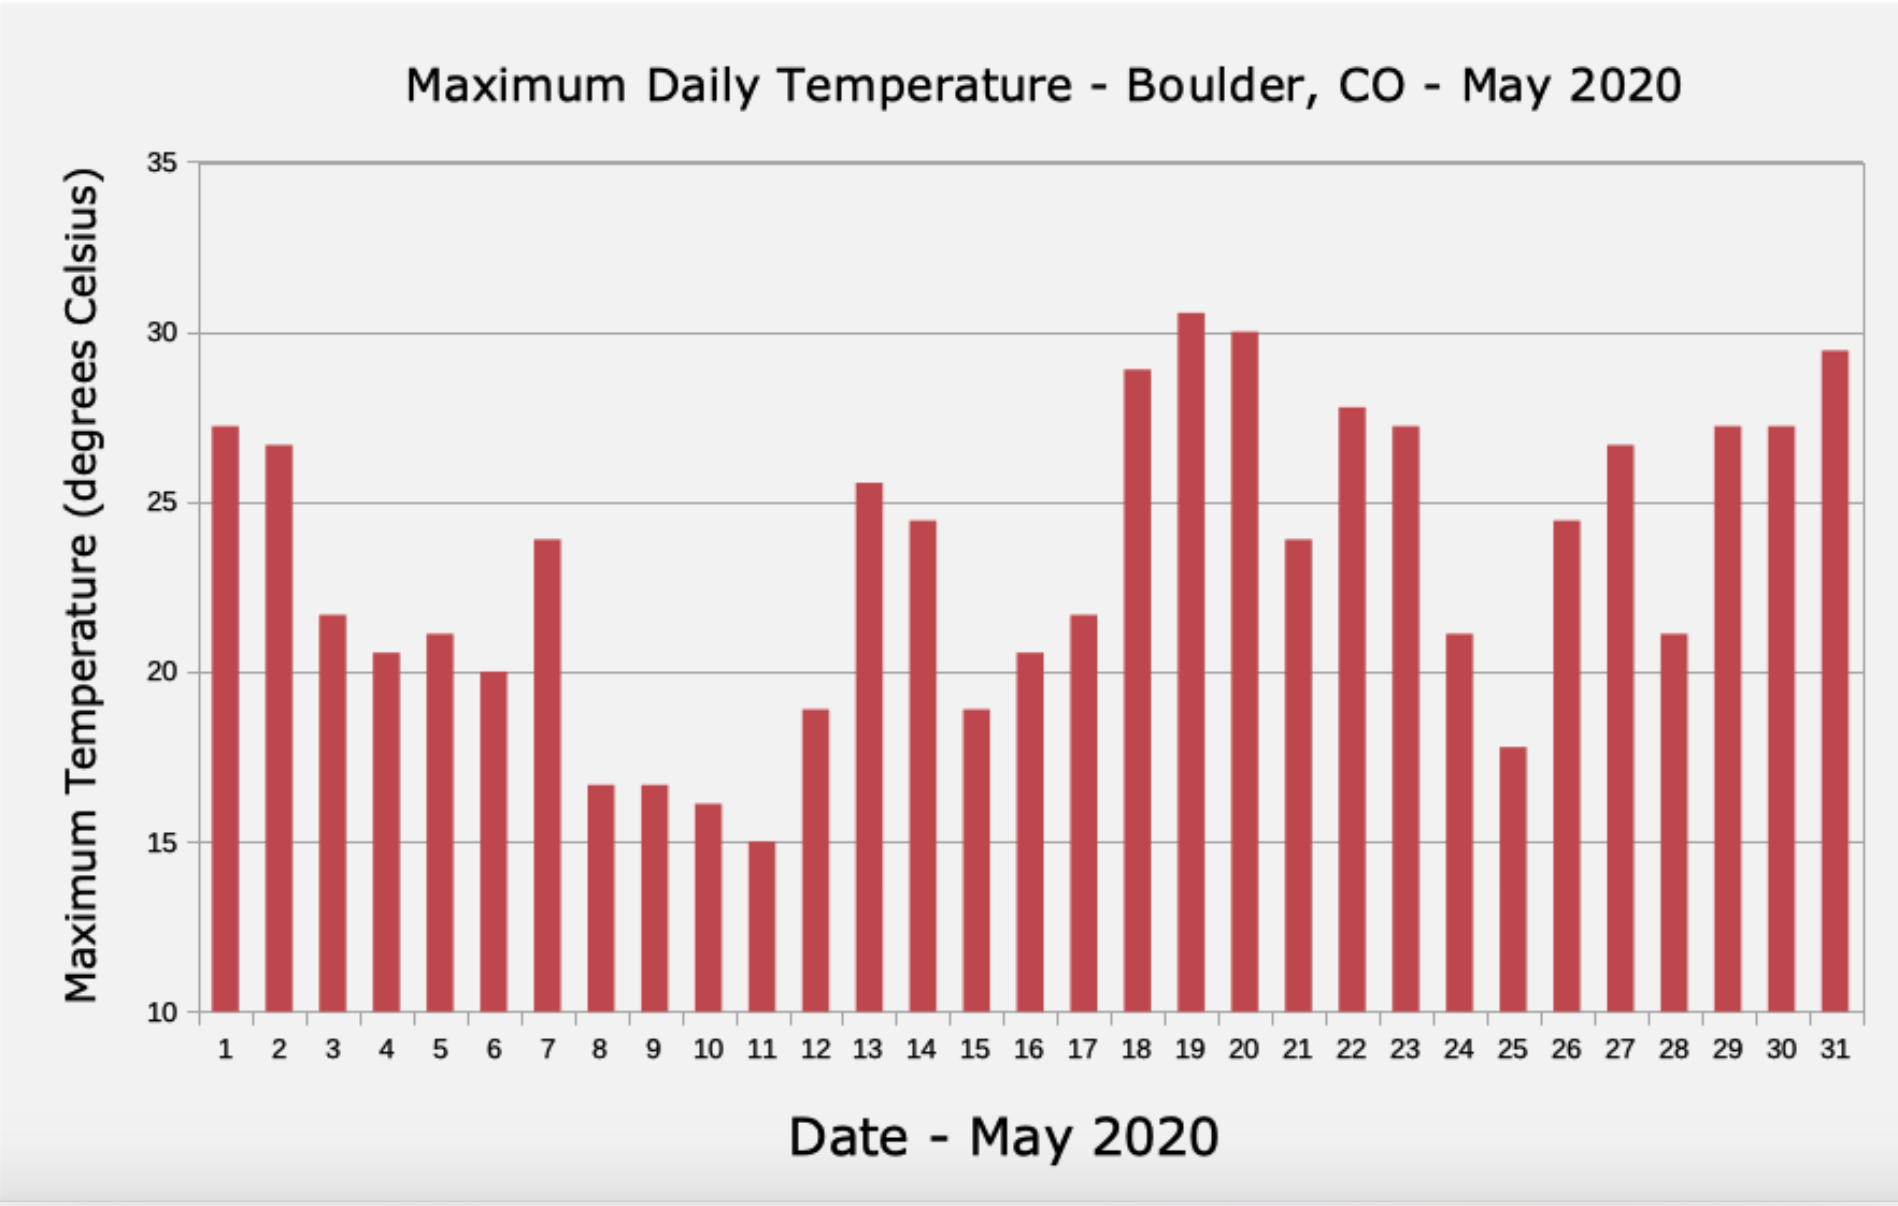 Daily High Temperatures - Boulder, CO - May 2020